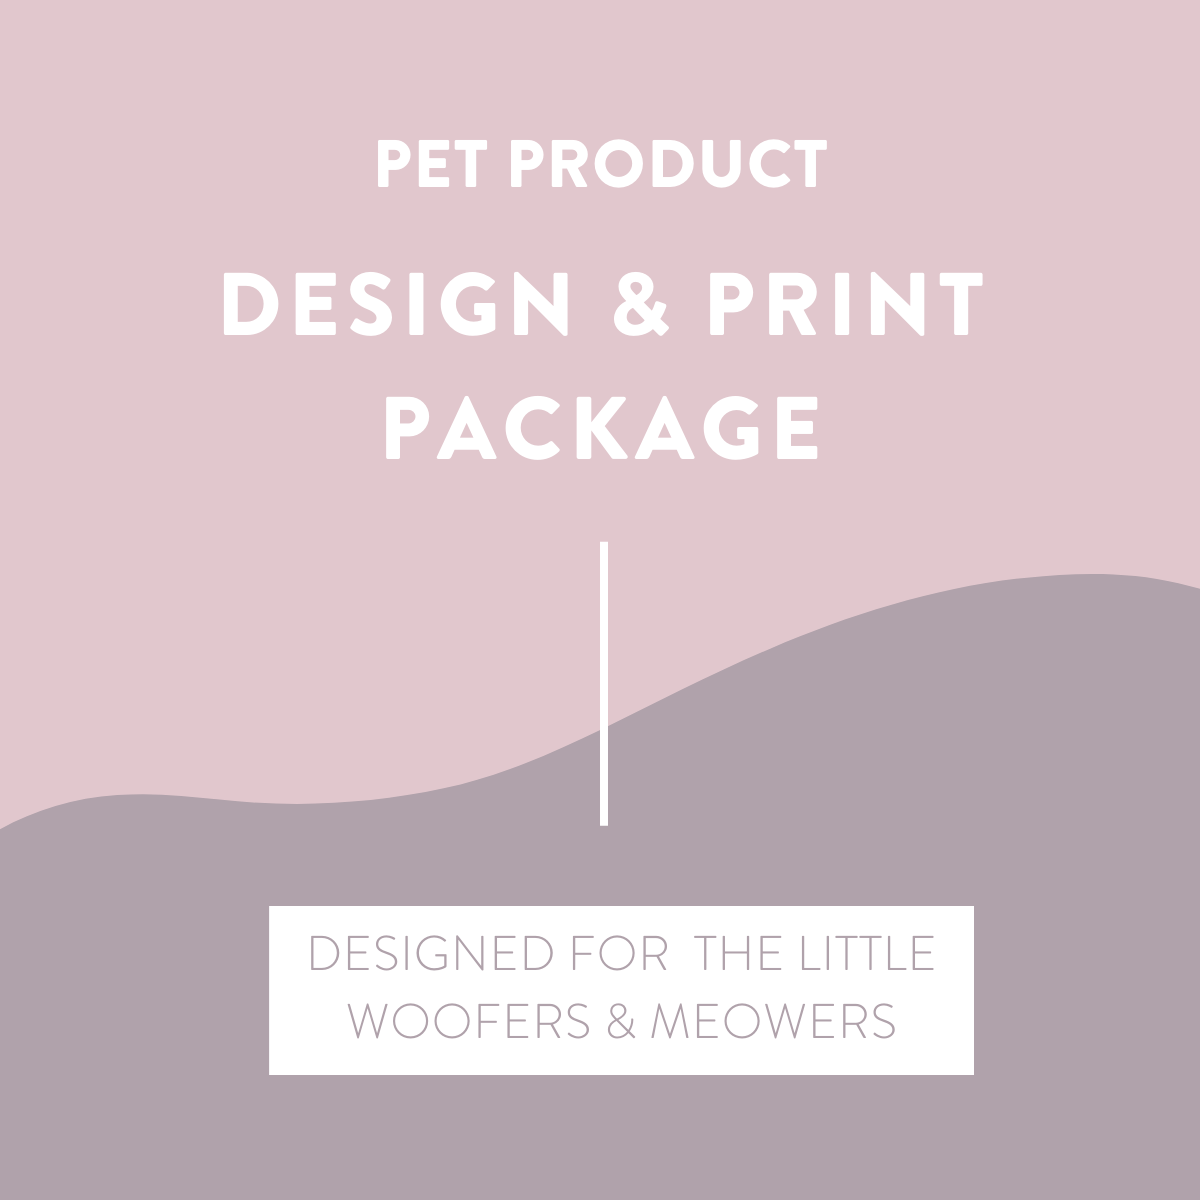 Pet Product Design & Print Package